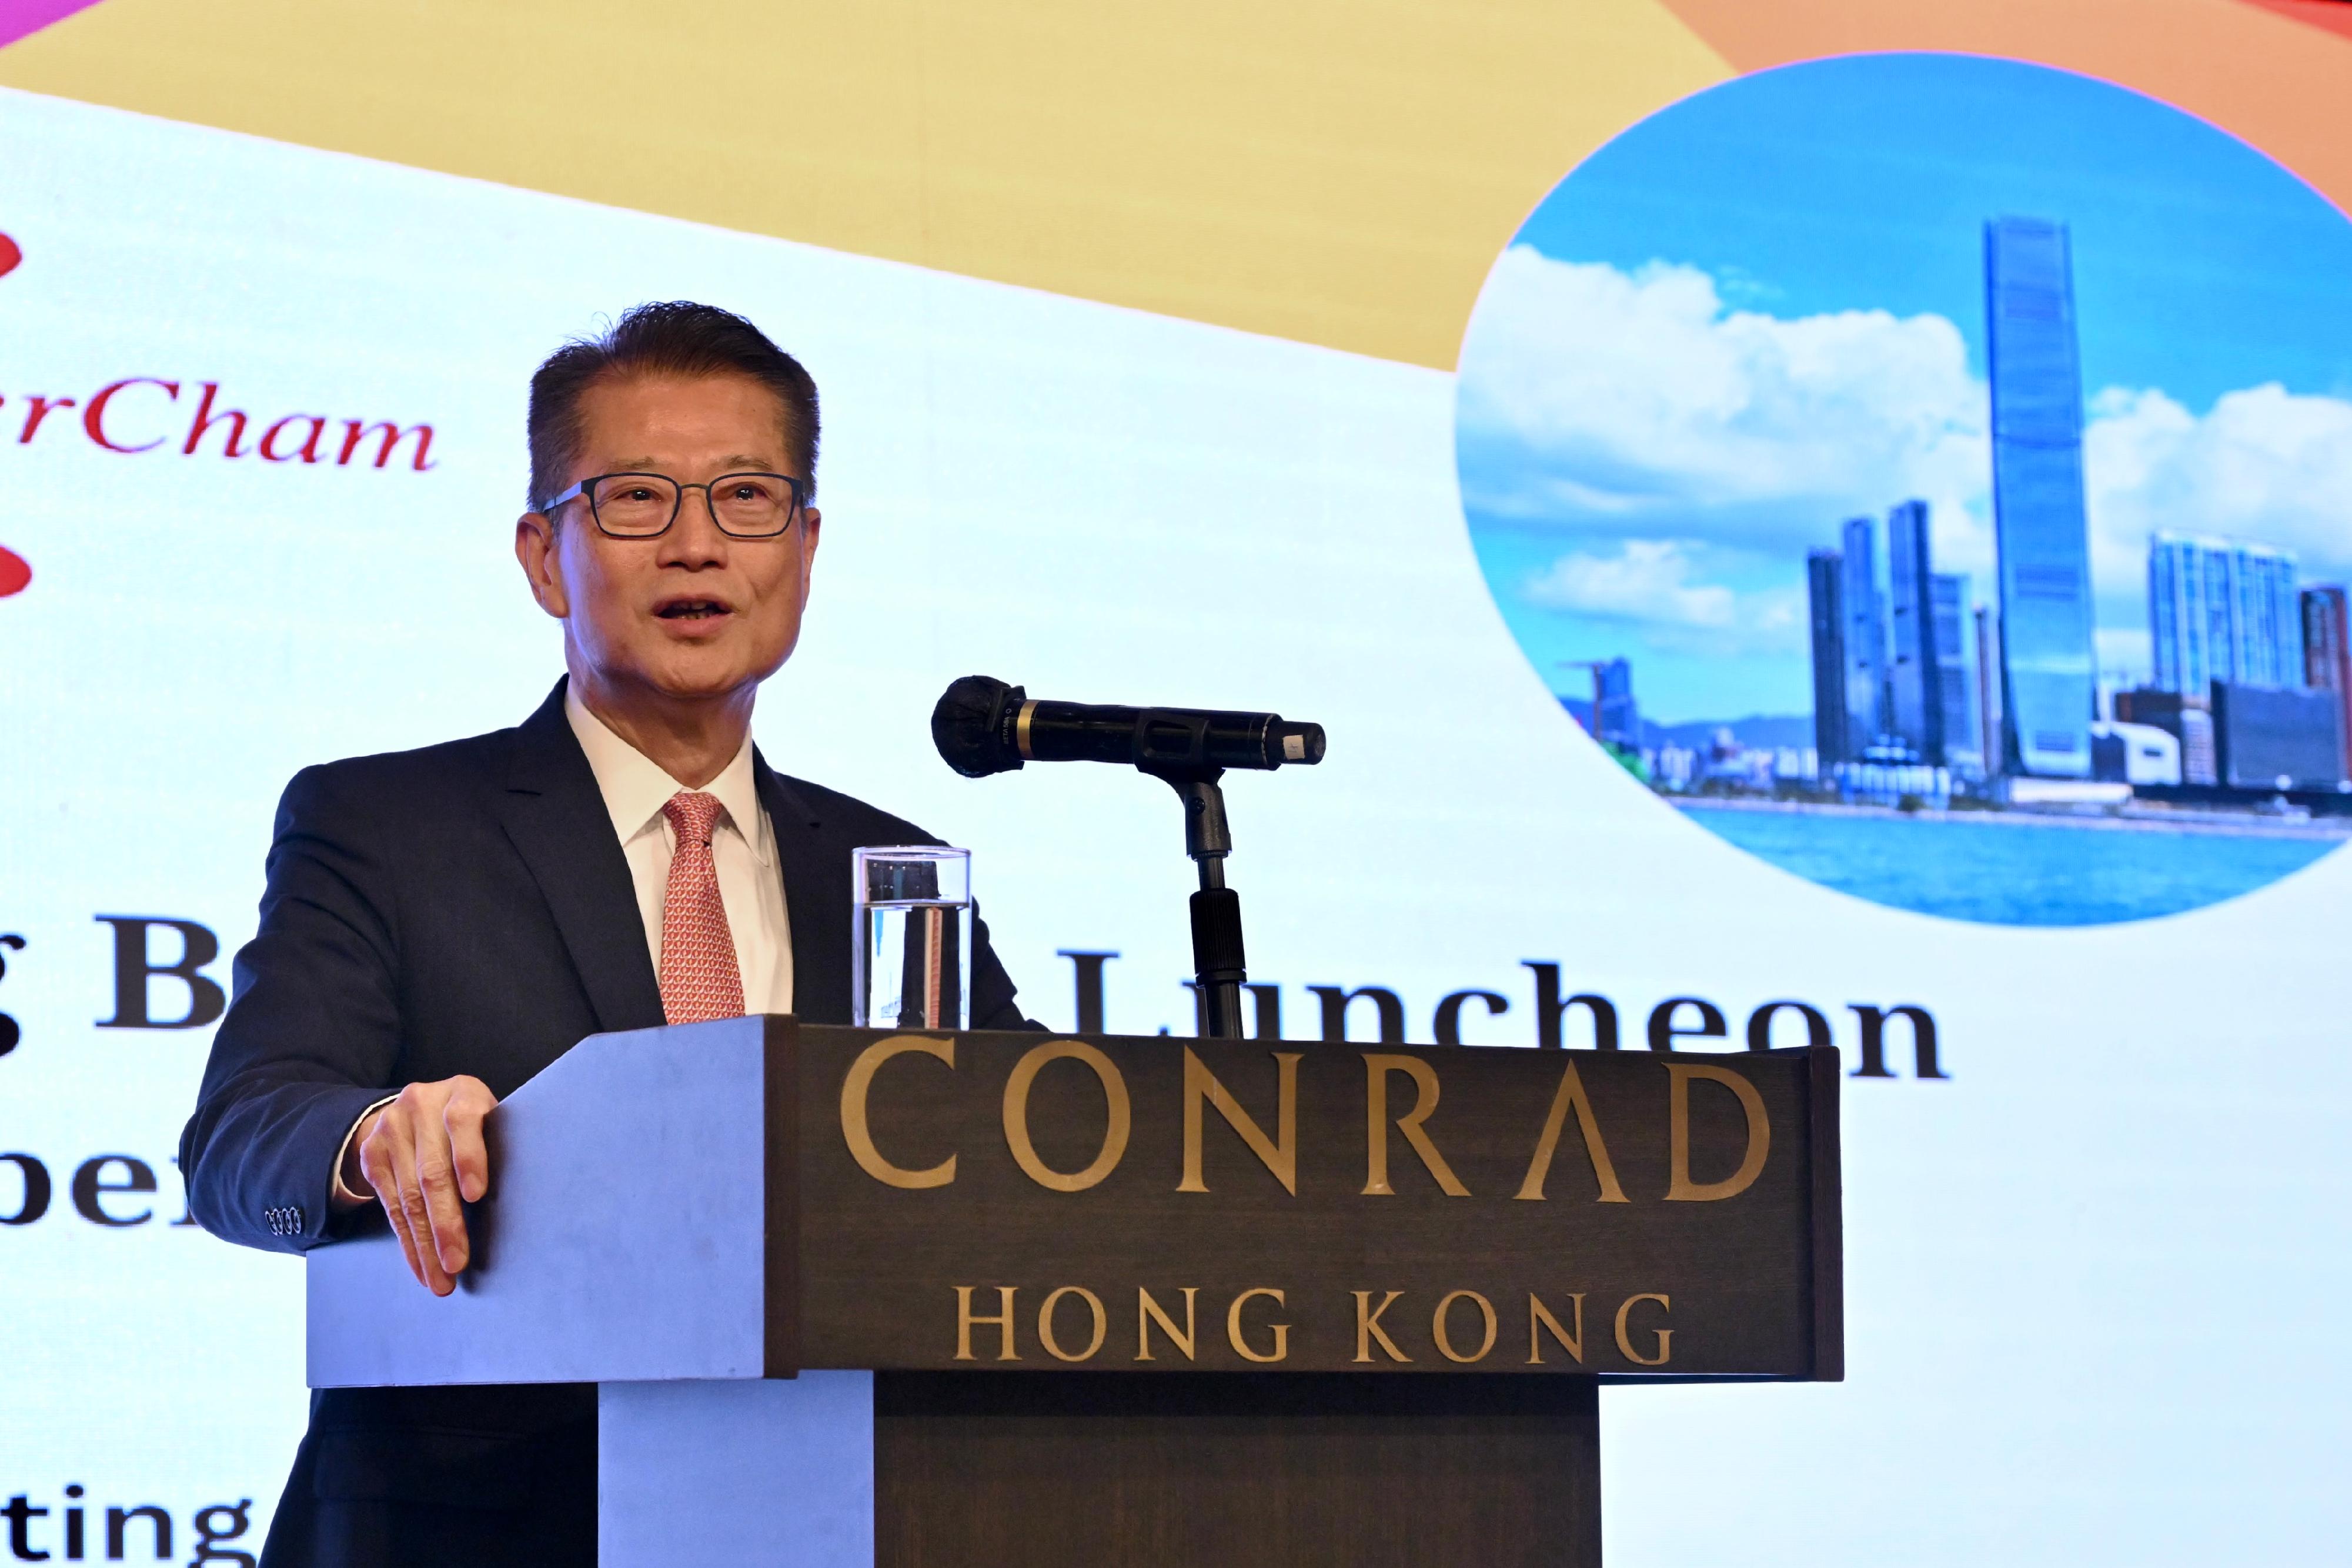 The Financial Secretary, Mr Paul Chan, speaks at the InterCham Hong Kong Business Luncheon today (September 11).